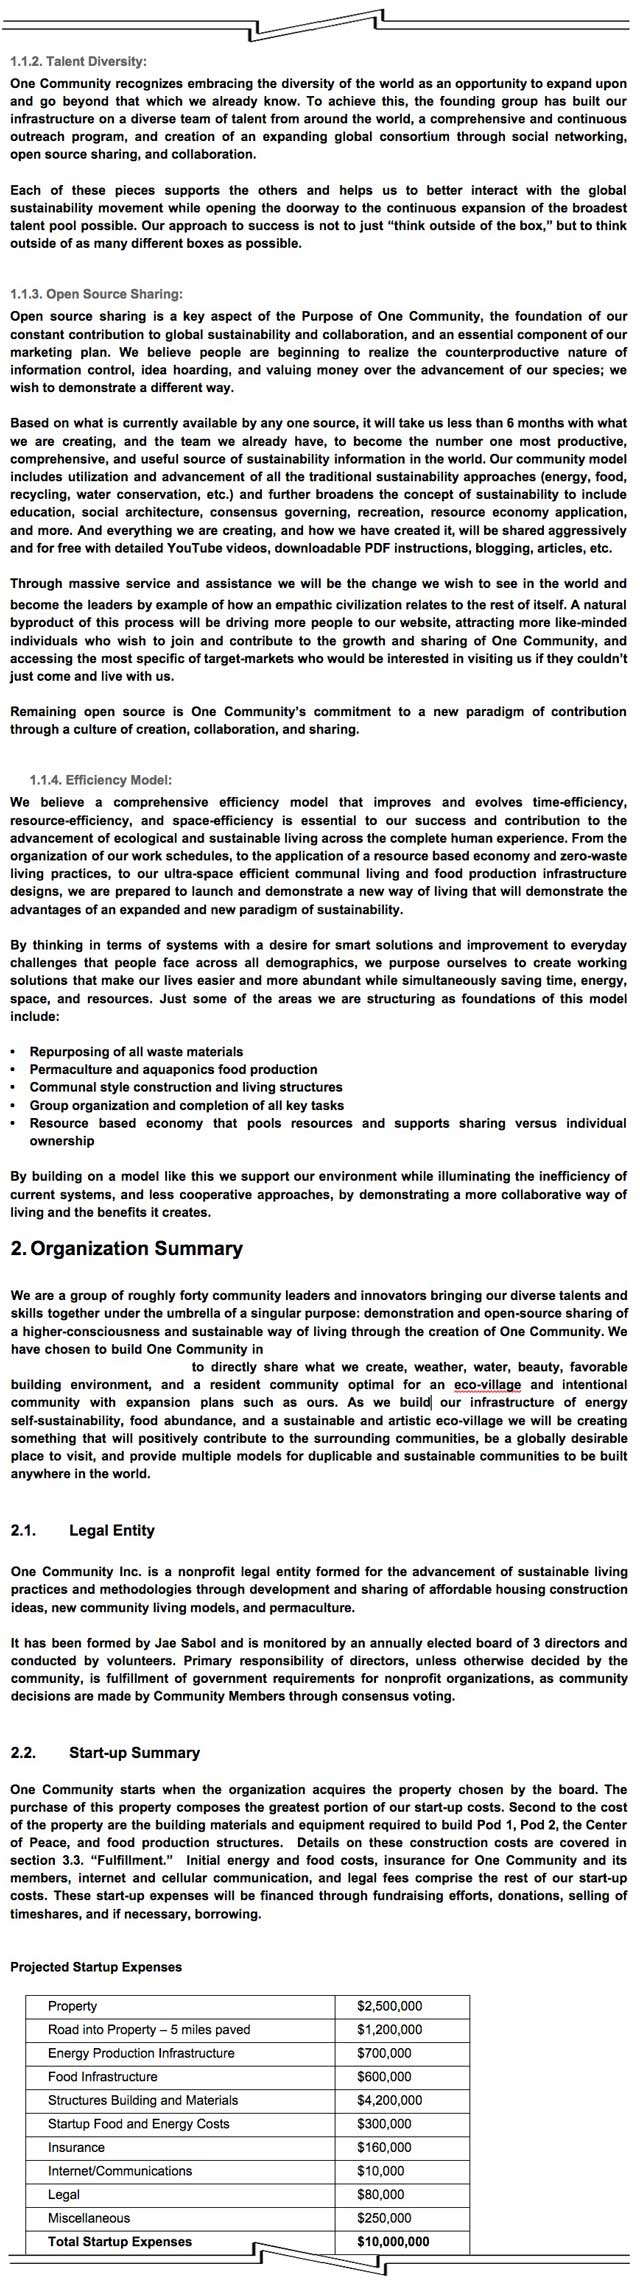 New-Paradigm Humanitarianism – This last week the core team continued working on a complete update of the One Community Business plan. What you see here is our 3rd week of reformatting the plan on a GoogleDoc for easier collaboration and sharing. We'd say we are about 15% done with the complete rewrite and update.